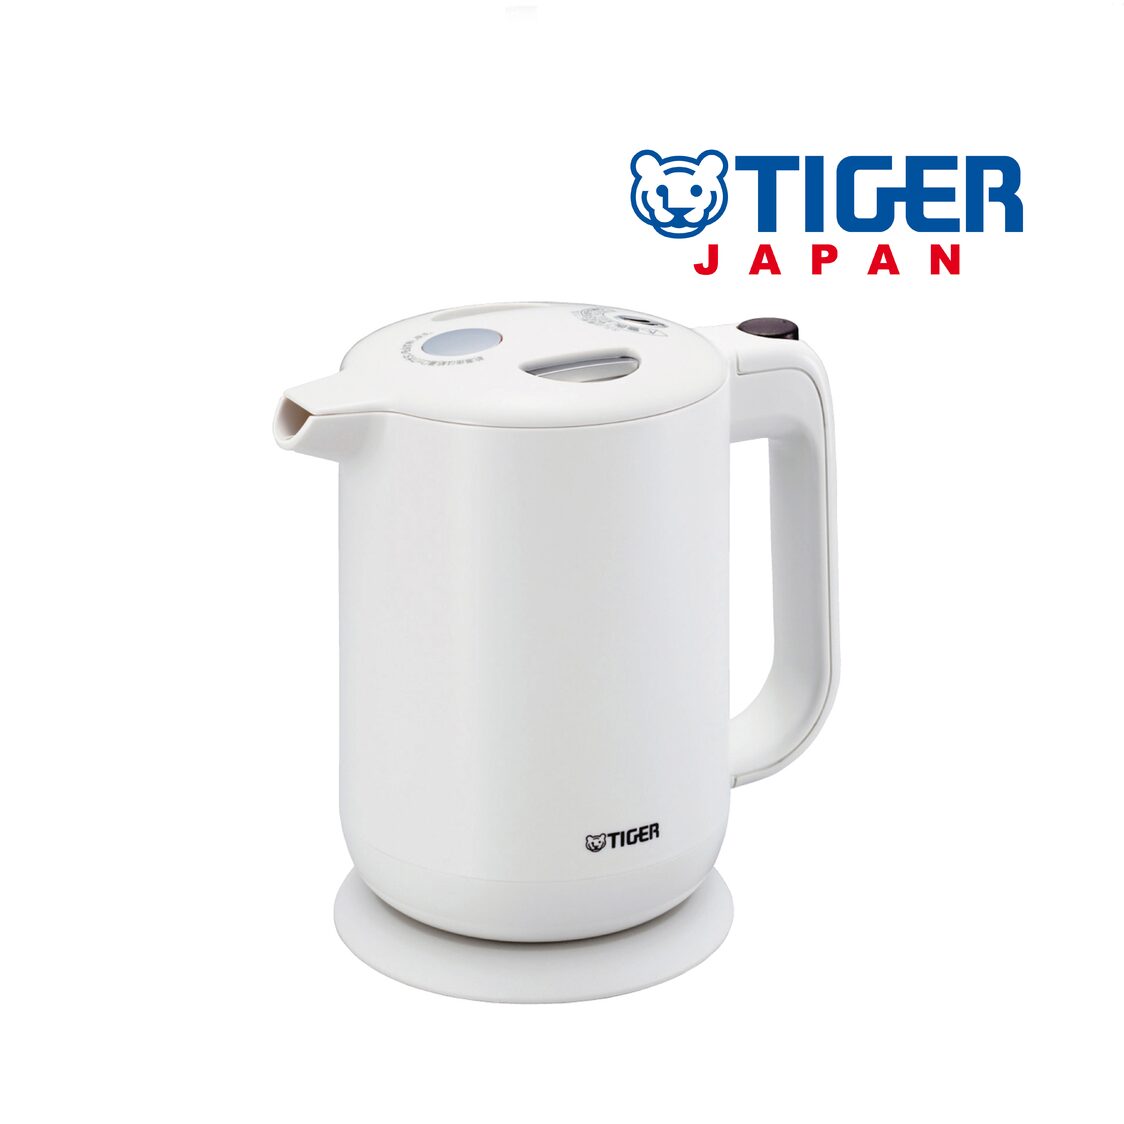 TIGER 1L Double Wall Electric Kettle - White PFY-A10S WHITE